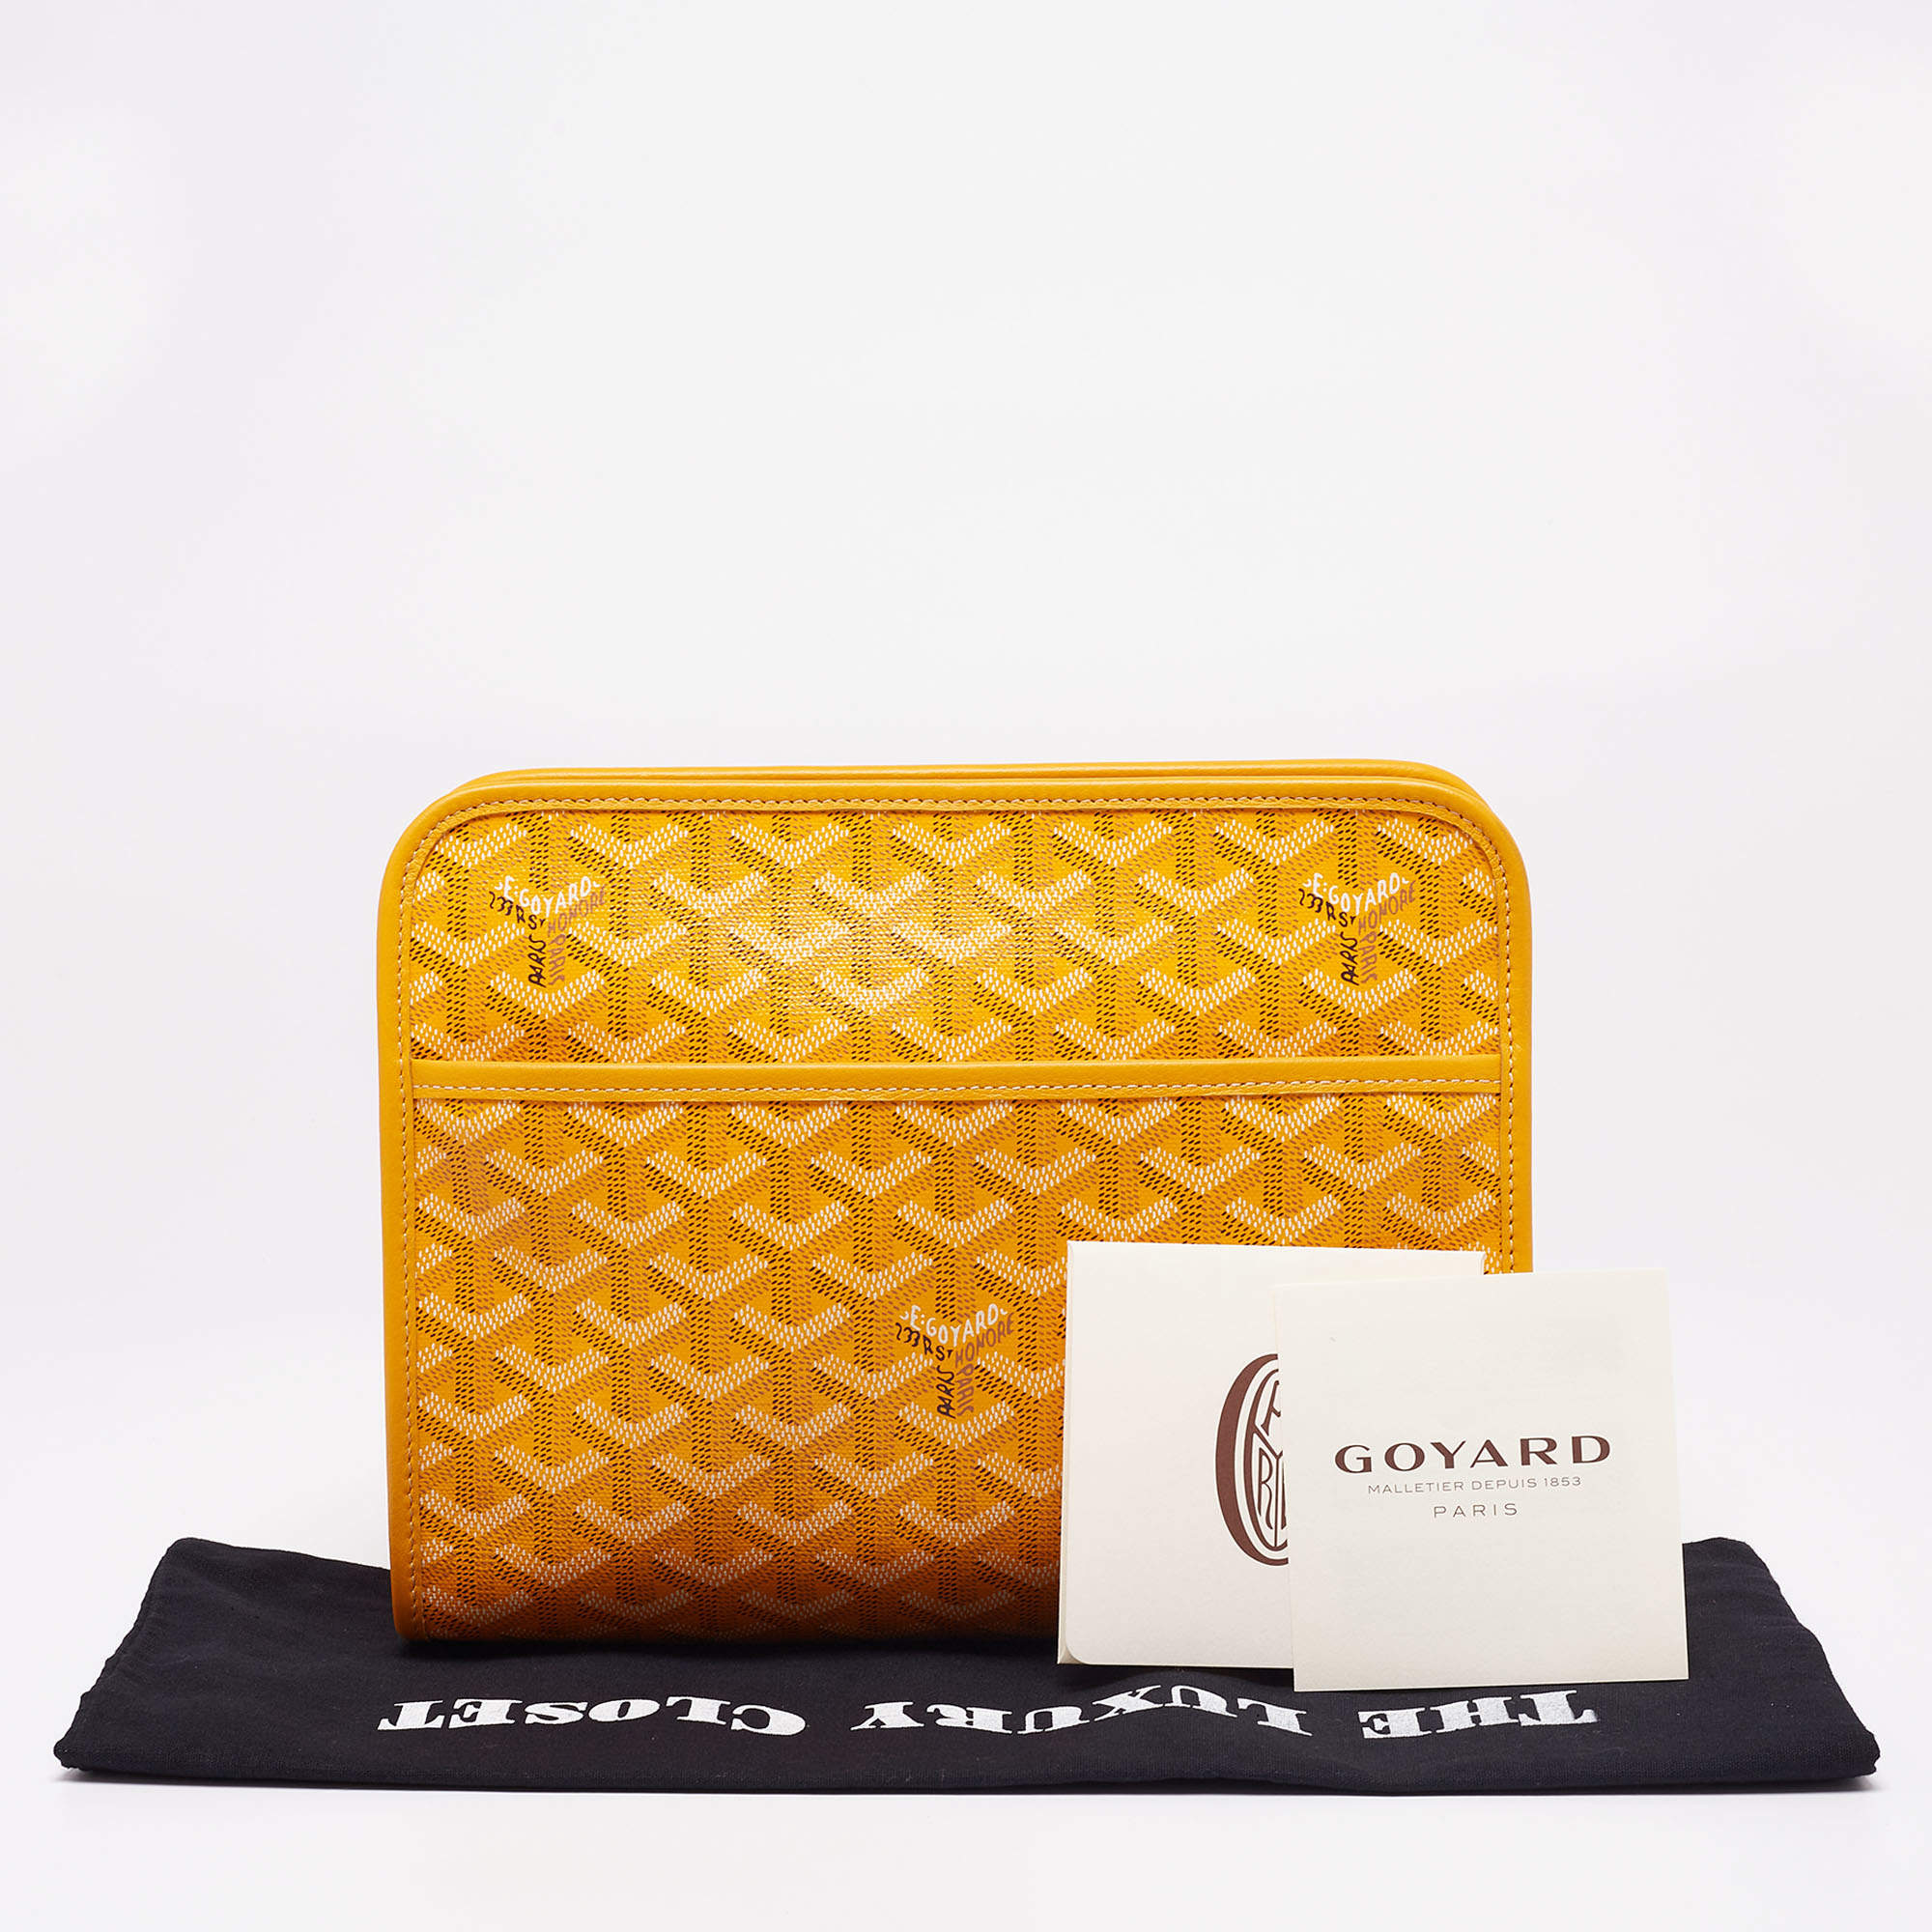 Goyard Jouvence MM (medium) - The perfect everyday pouch for your